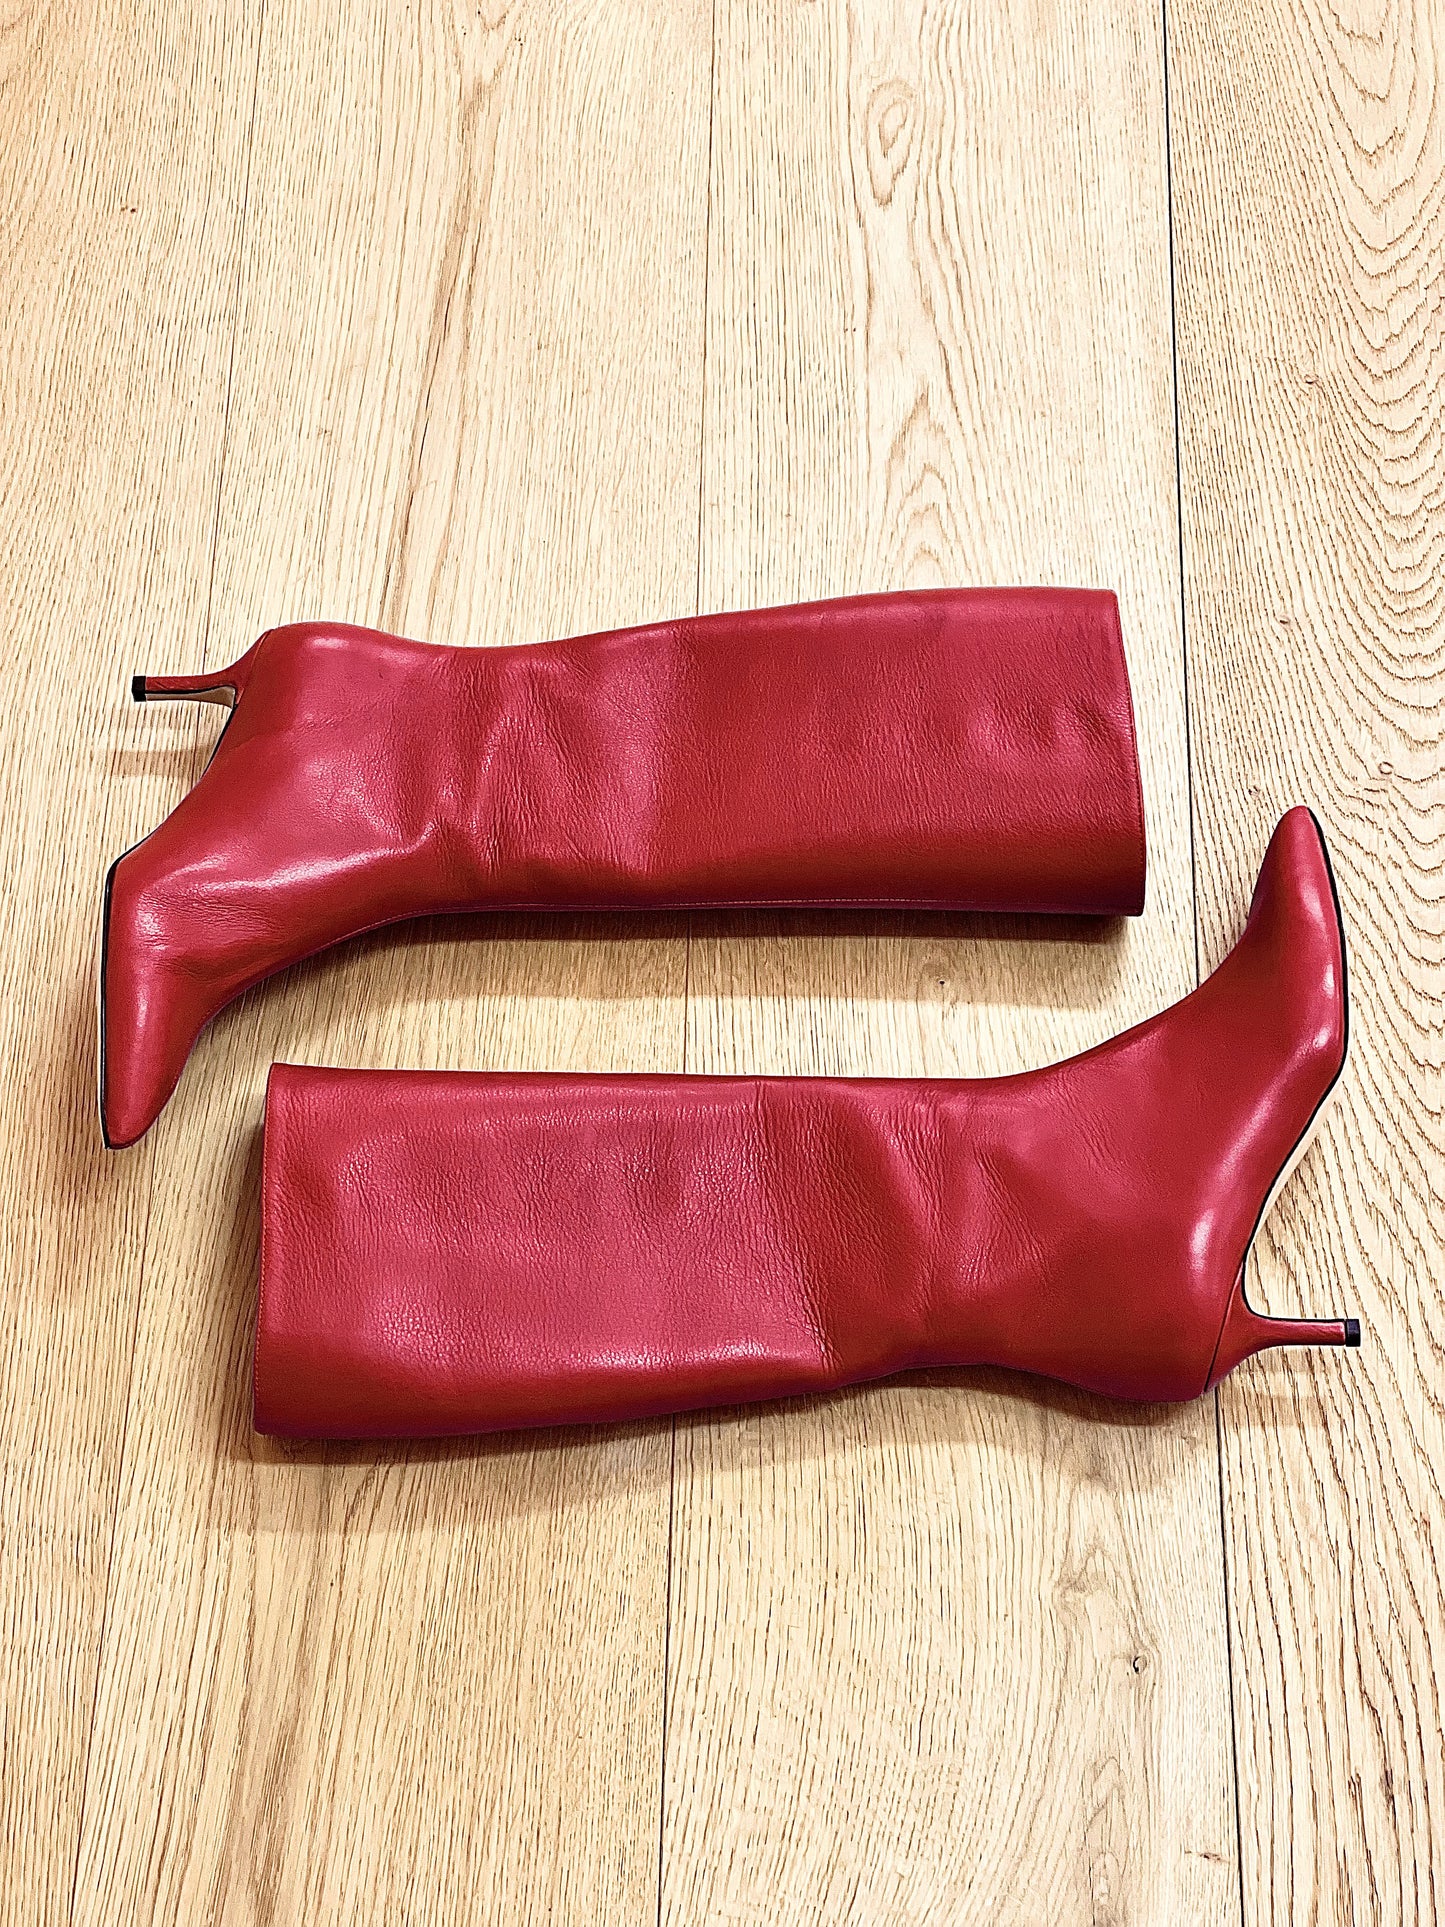 MELISSA LEATHER RED